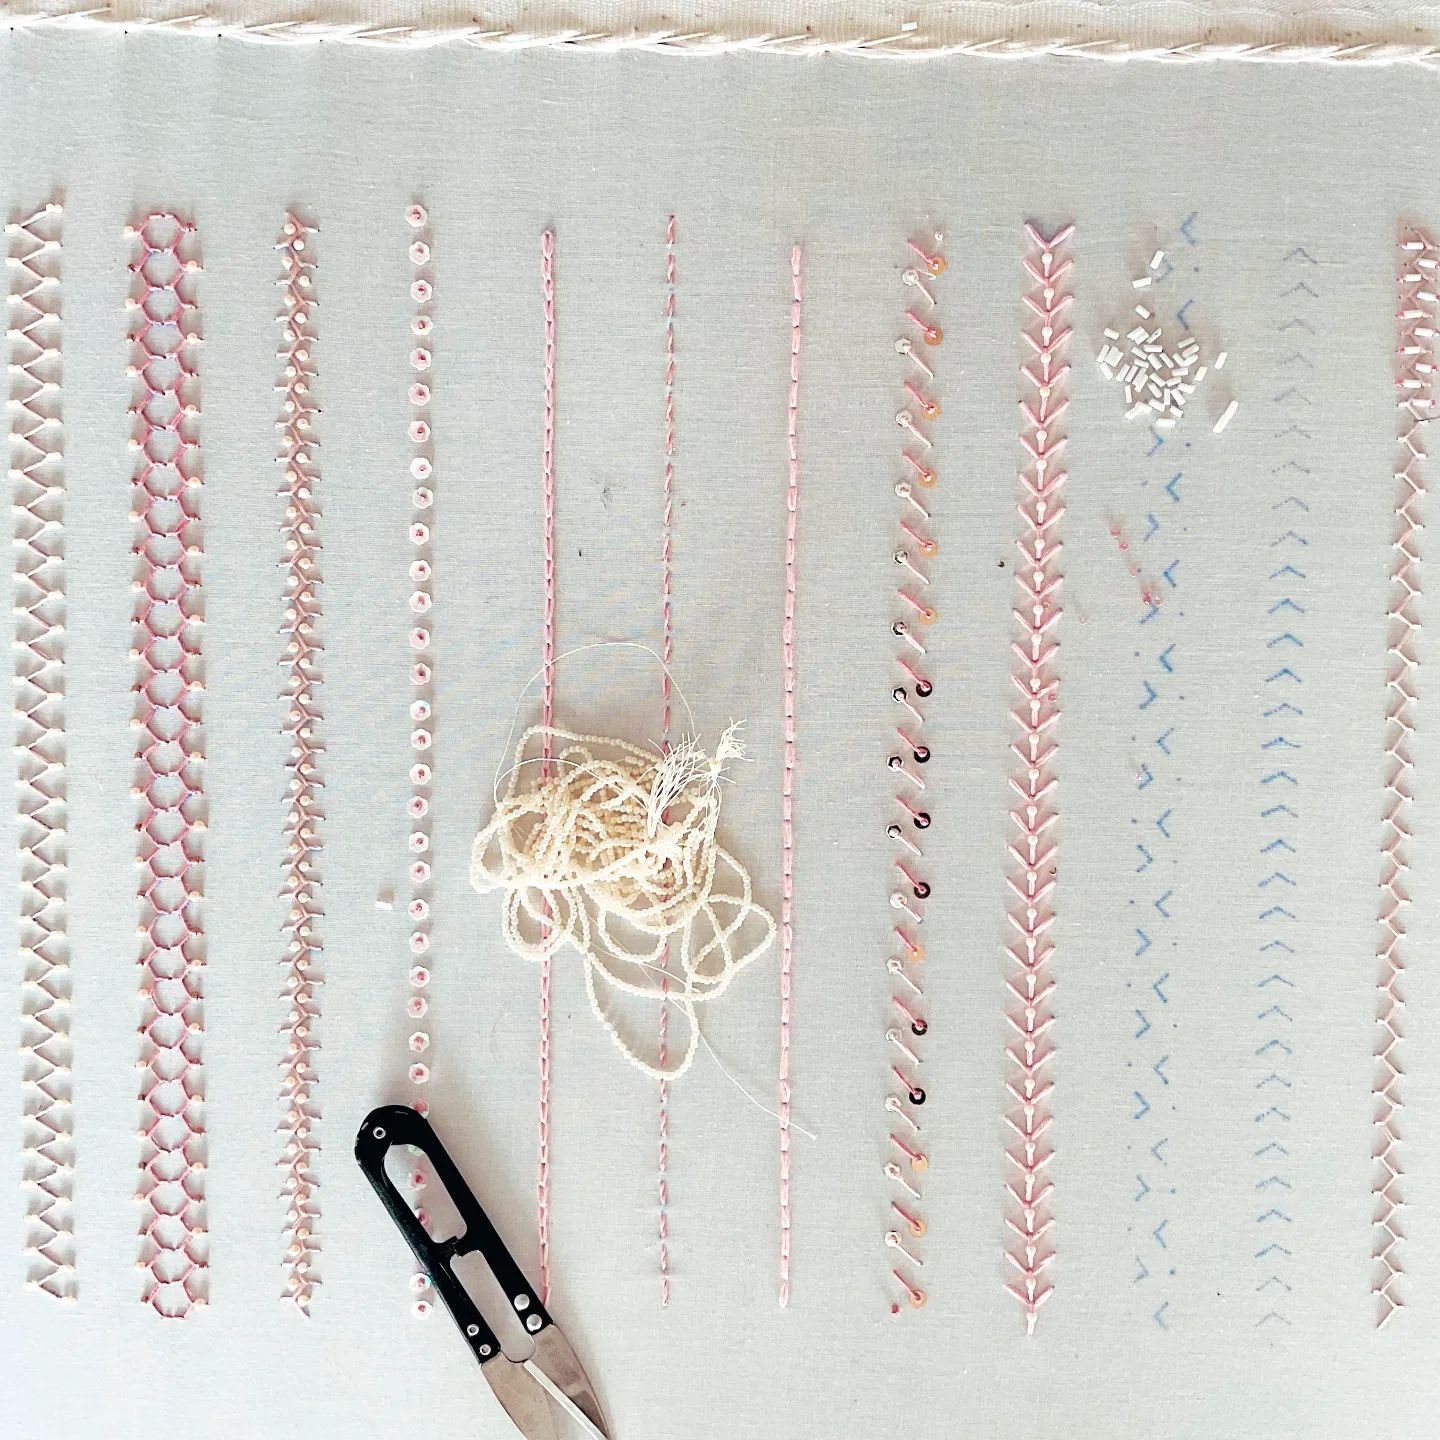 Get ready for fresh stitches, embellishments and exciting new techniques! #embroideryworkshop